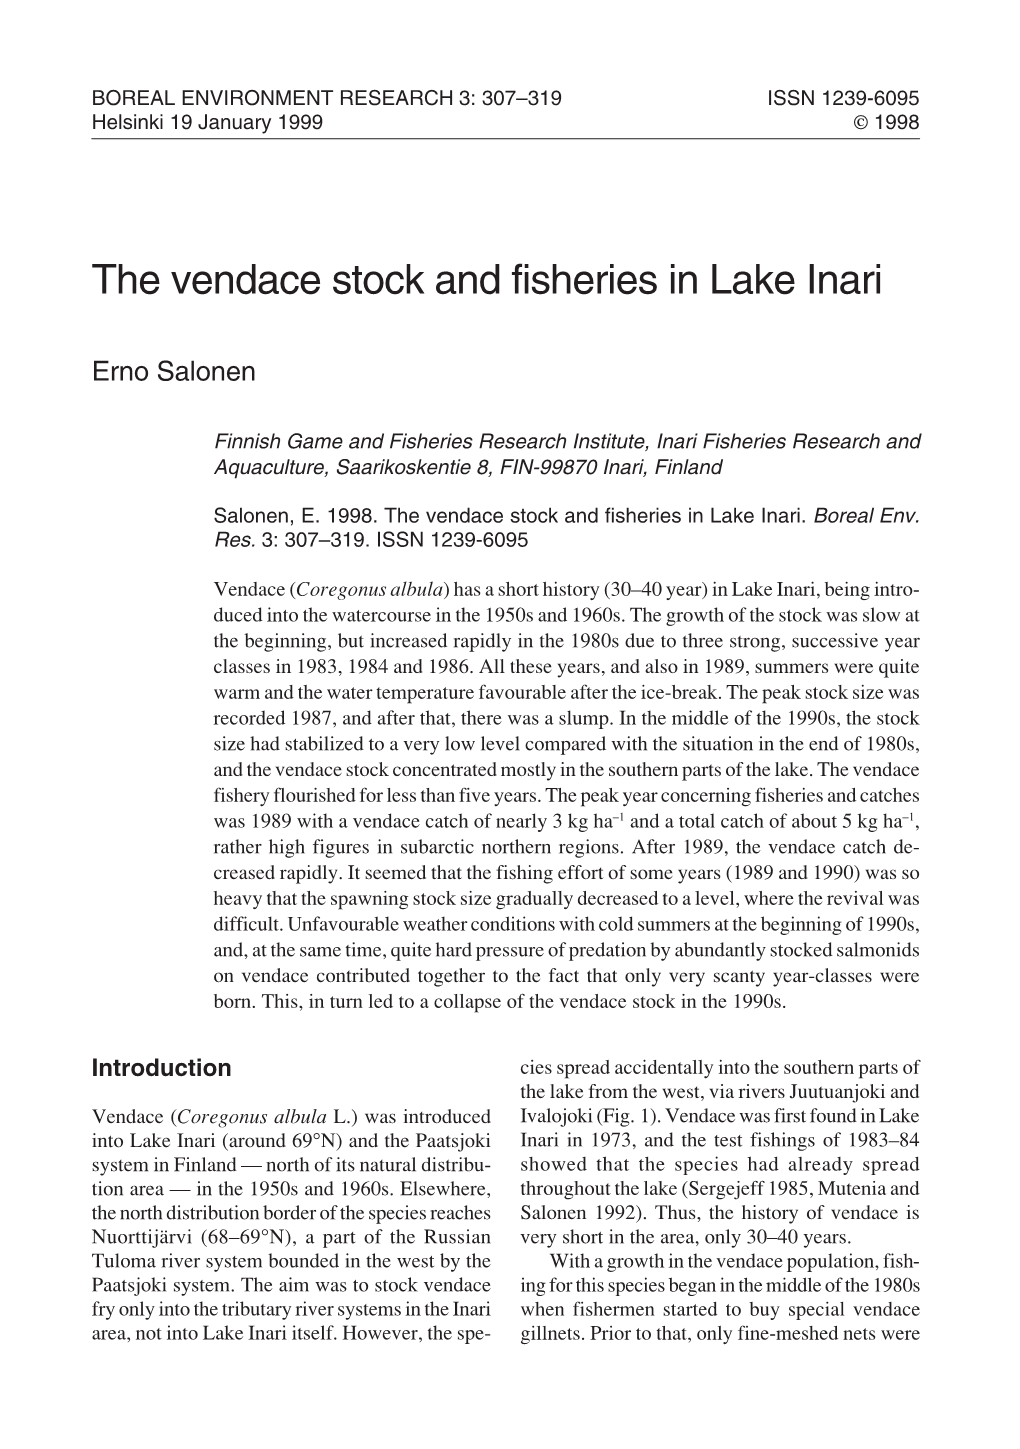 The Vendace Stock and Fisheries in Lake Inari